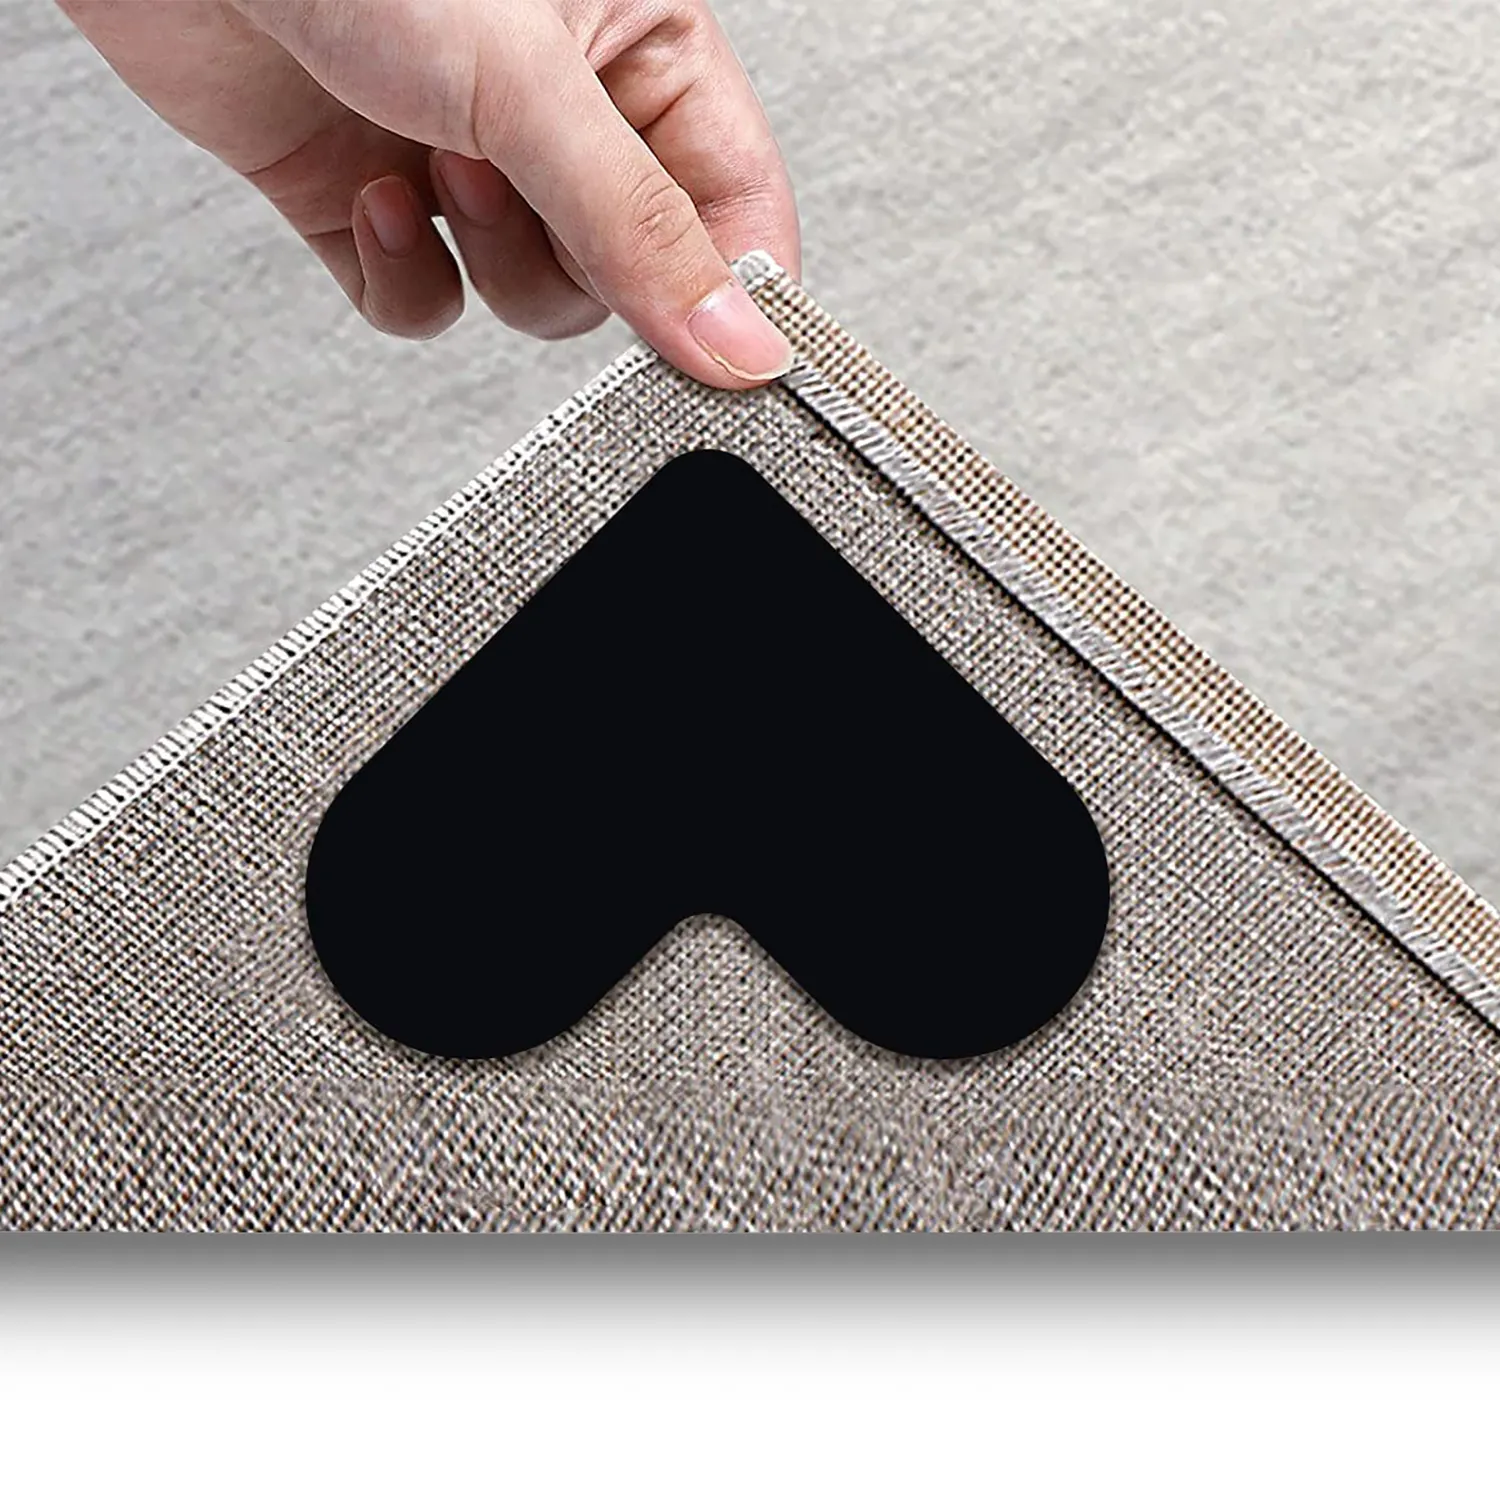 Rug Gripper Tape - Carpet Tape Double Sided - Rug Tape for Hardwood Floor -  Non Slip Pads for Area Rugs - Carpet Binding Tape, Heavy Duty Stickers Grip,  Anti Curling Pad